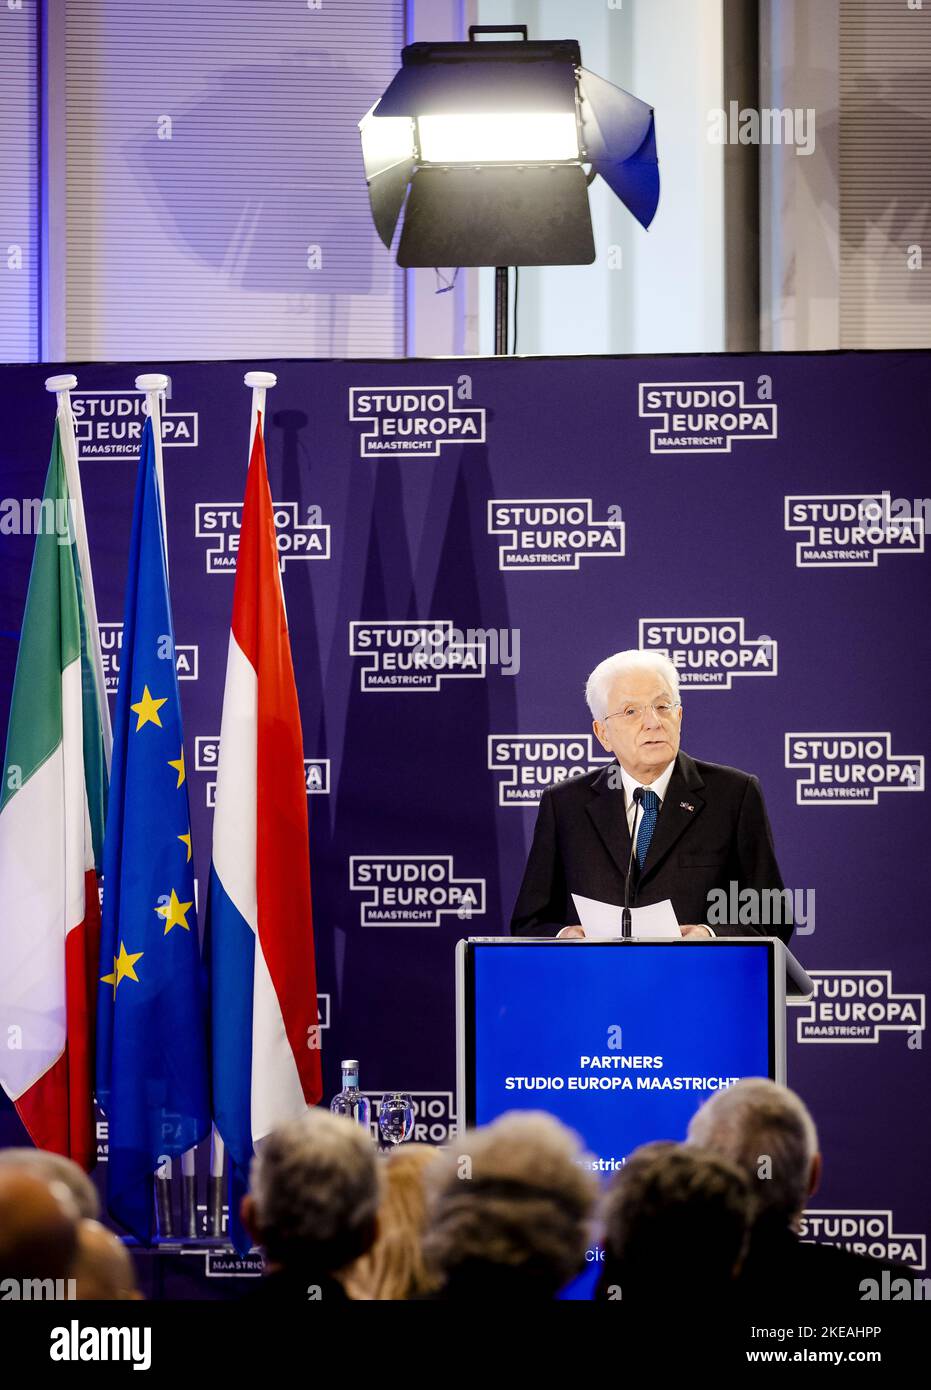 MAASTRICHT - 2022-11-11 11:38:47 MAASTRICHT - Italian President Sergio Mattarella gives a speech in Maastricht during the last day of a three-day state visit to the Netherlands. ANP SEM VAN DER WAL netherlands out - belgium out Stock Photo